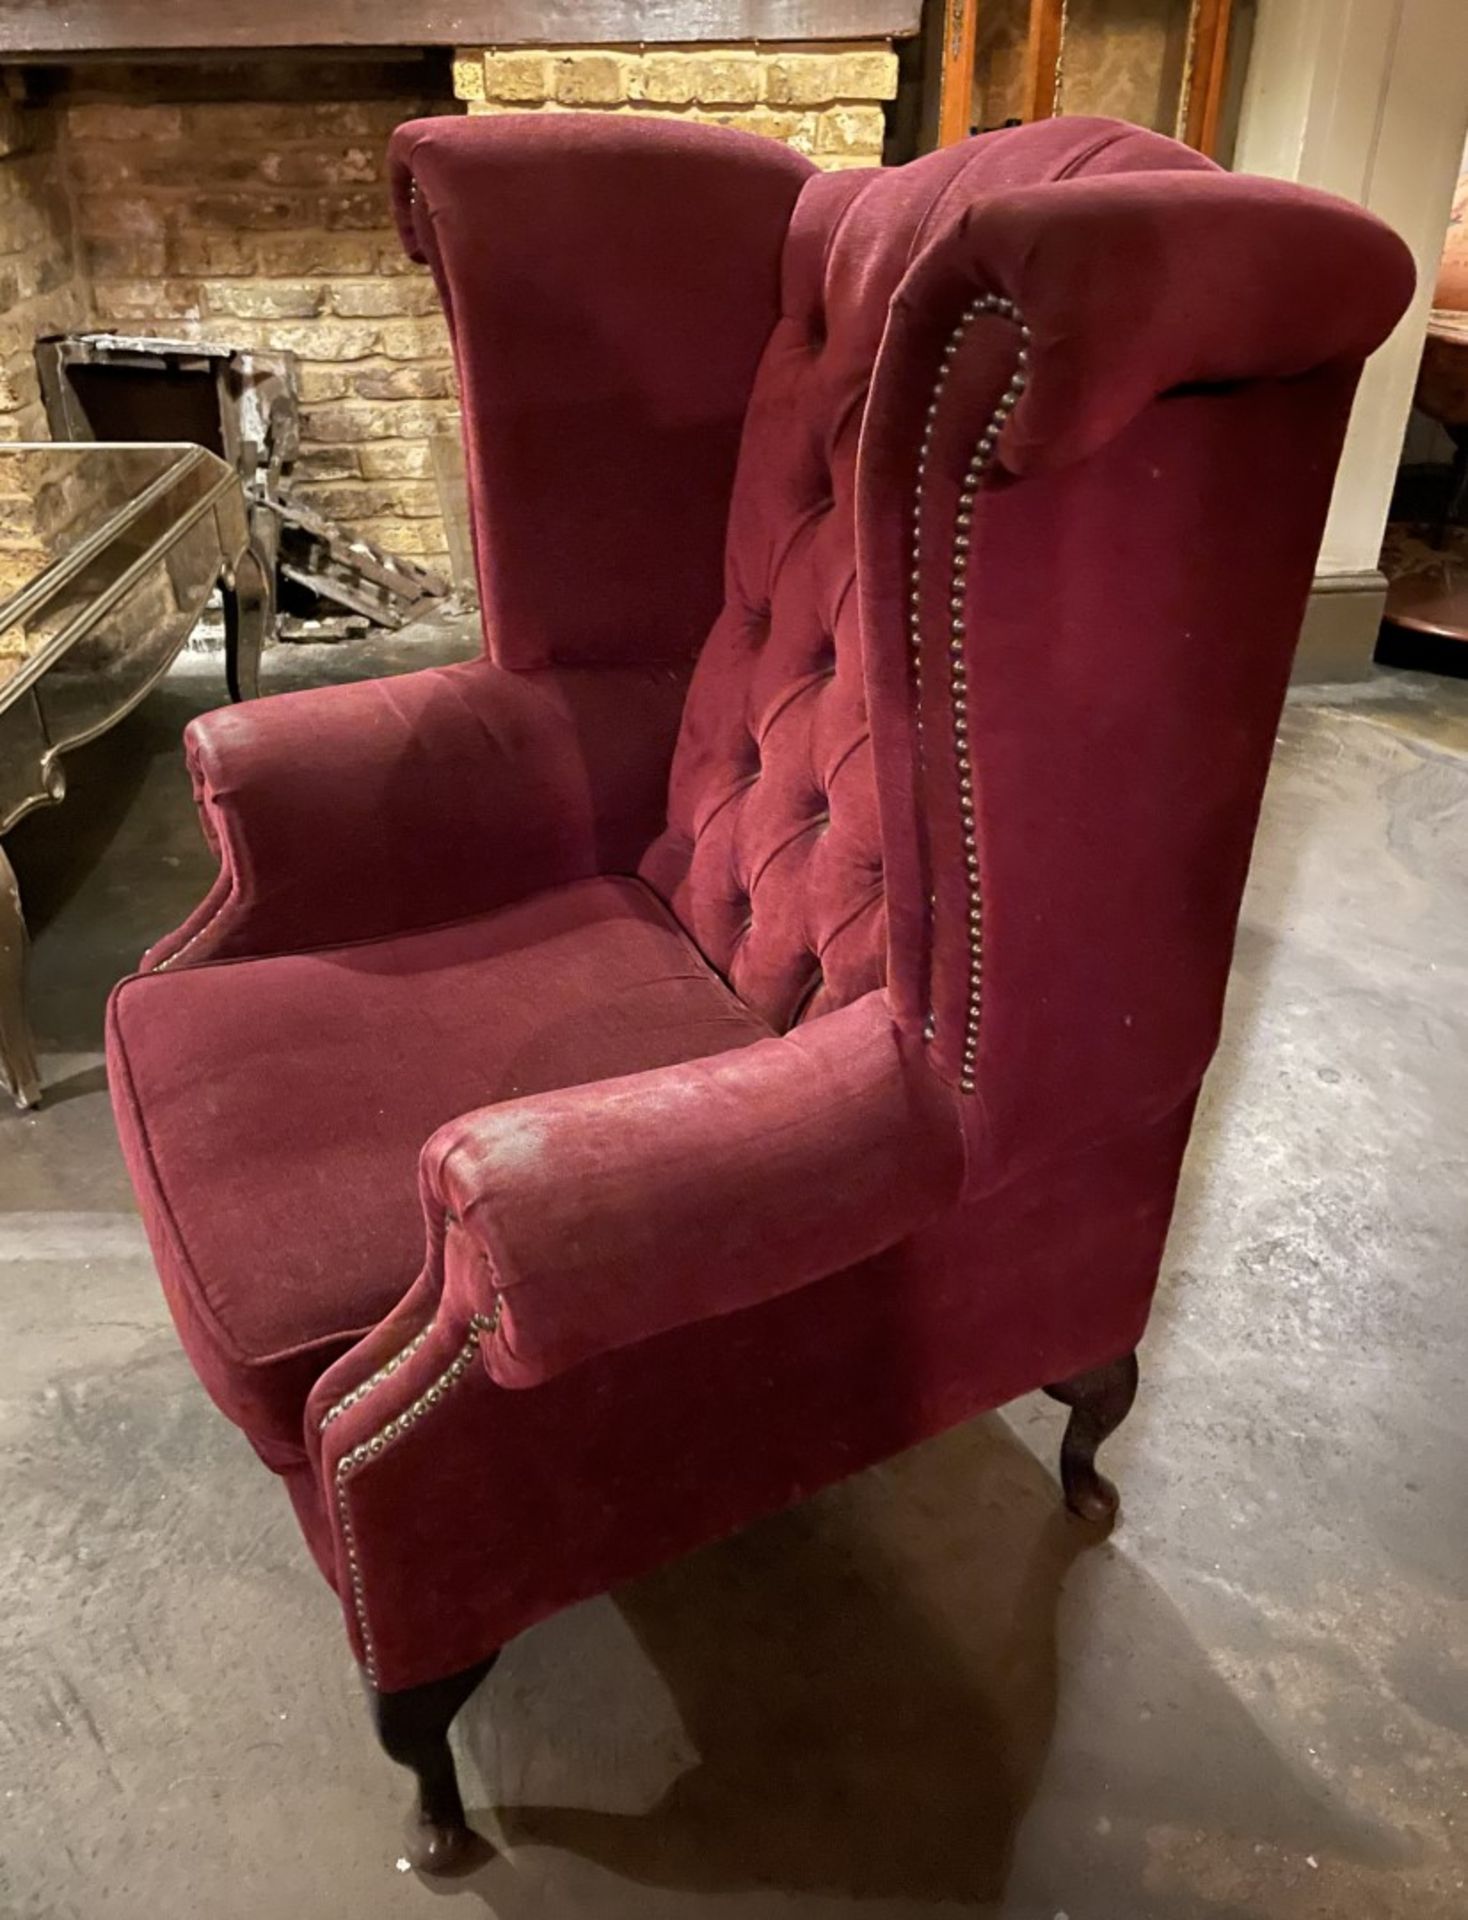 1 x Period-style Distressed Chesterfield Queen Anne High Button-Tufted Wing Back Armchair in Red - Image 2 of 9